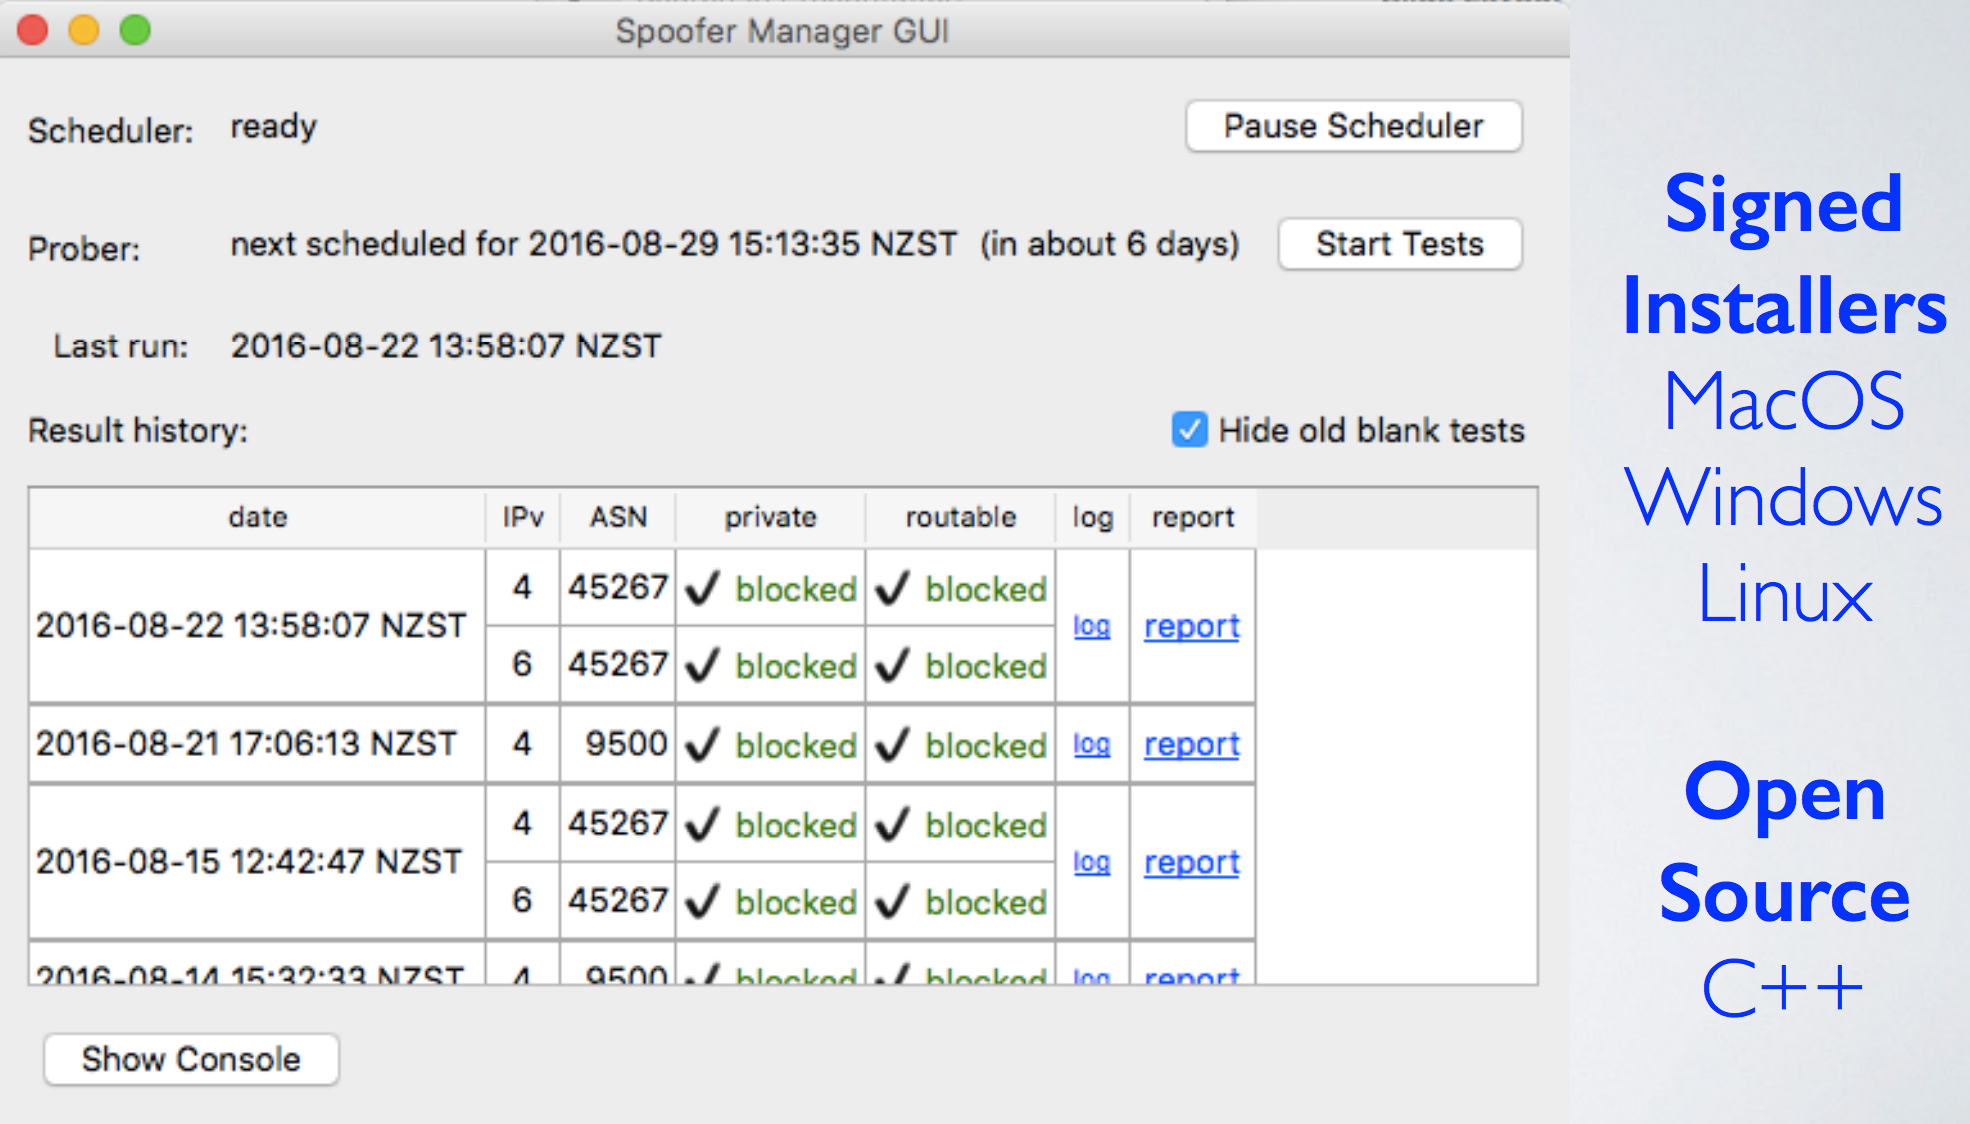 <a href="https://www.caida.org/projects/spoofer" target="_blank">Download your copy of Spoofer Tool</a>